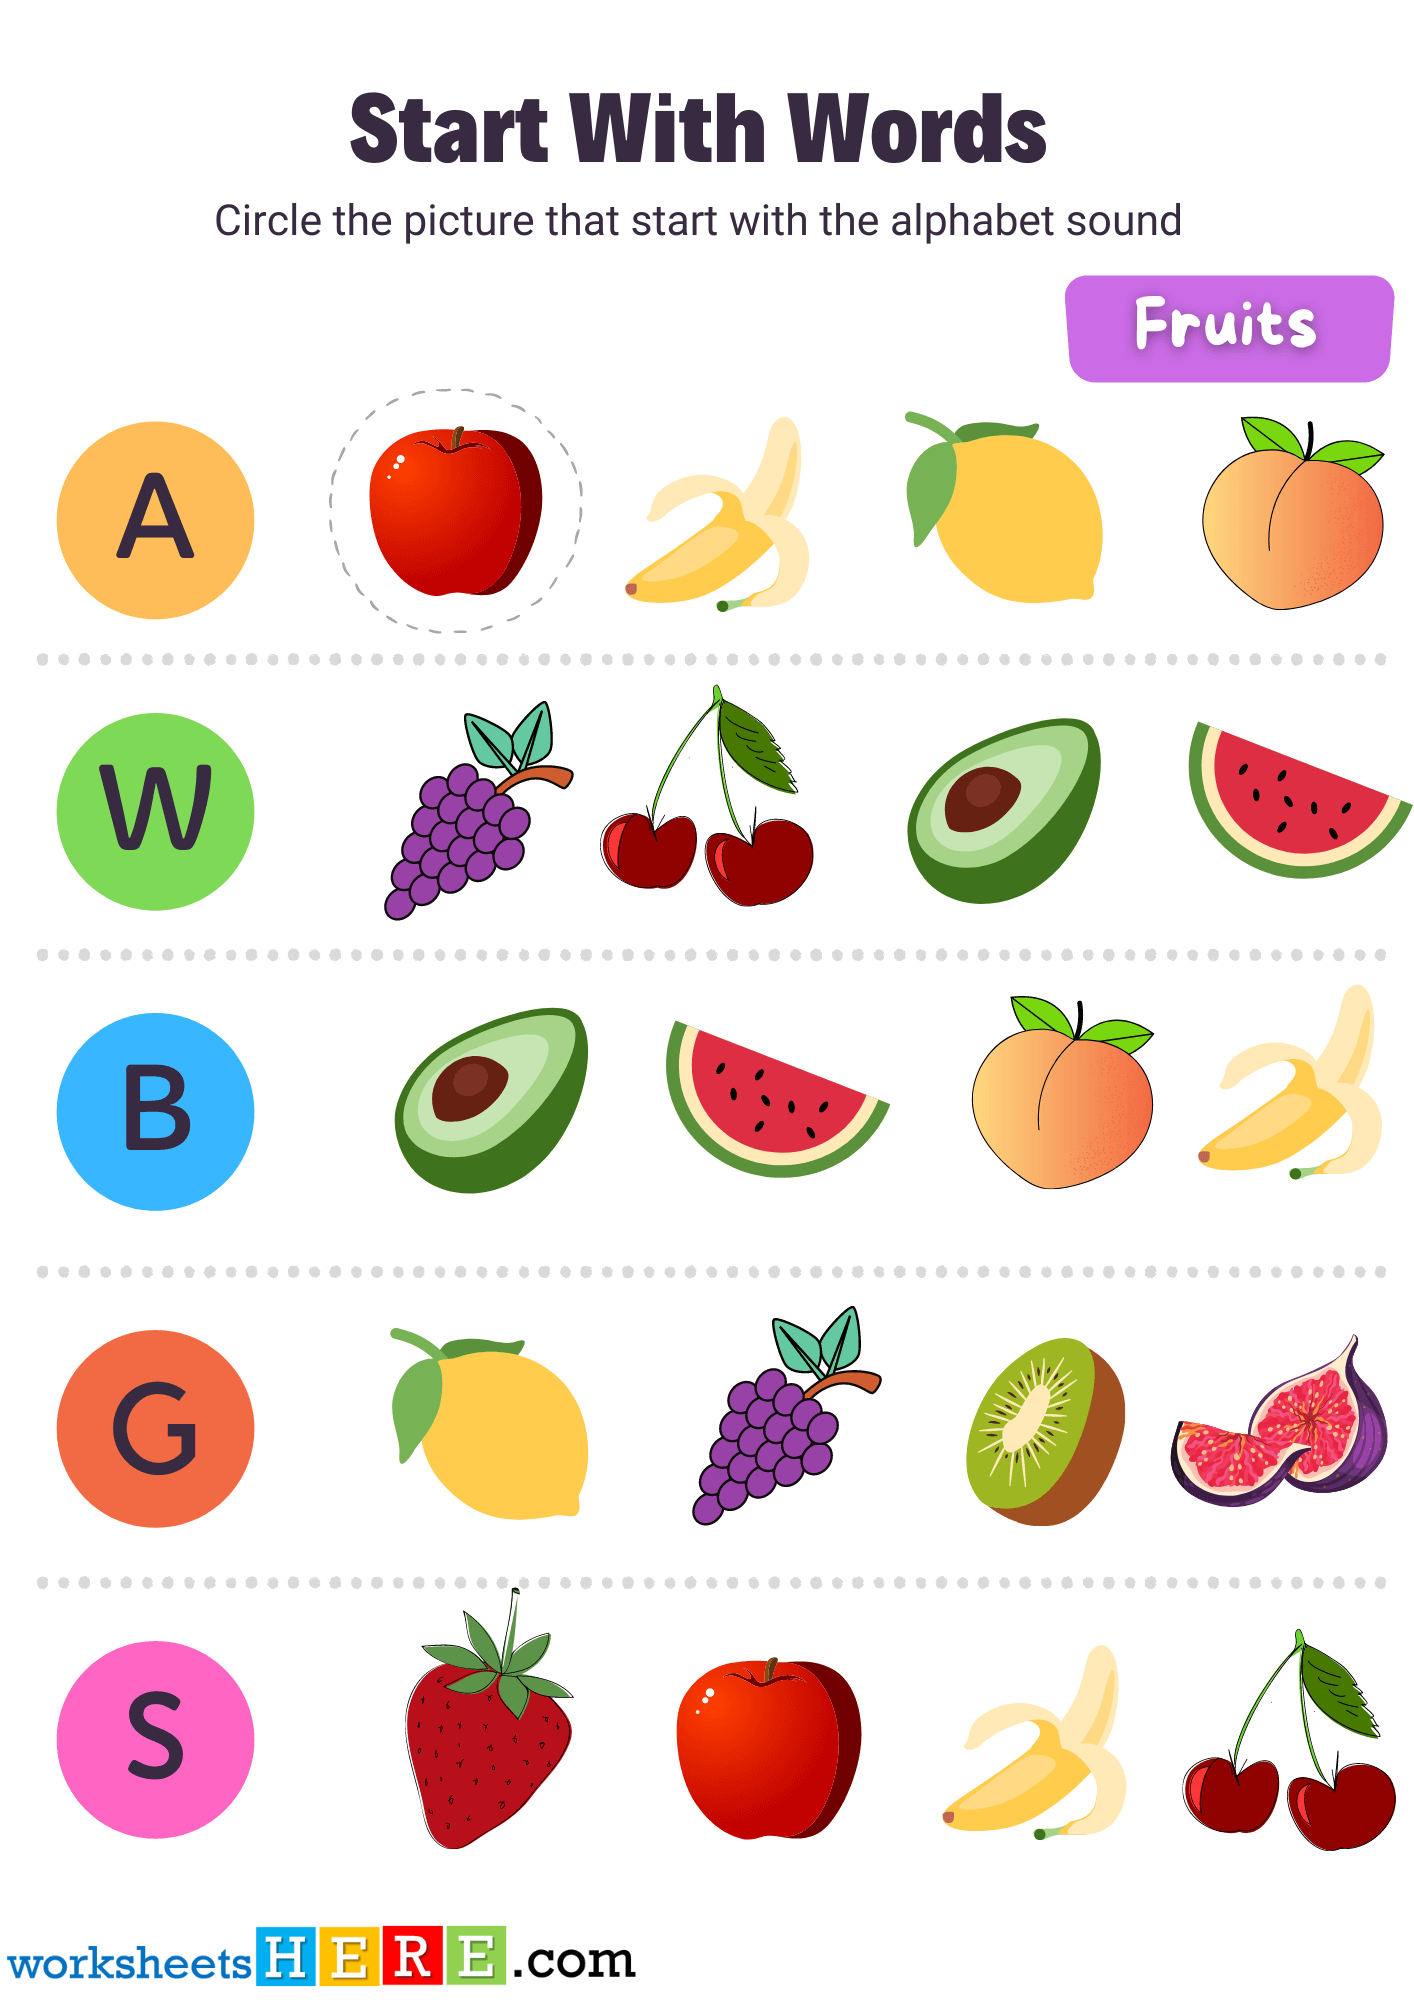 Circle Start With Words Activity About Fruits, Pdf Worksheets For Kids